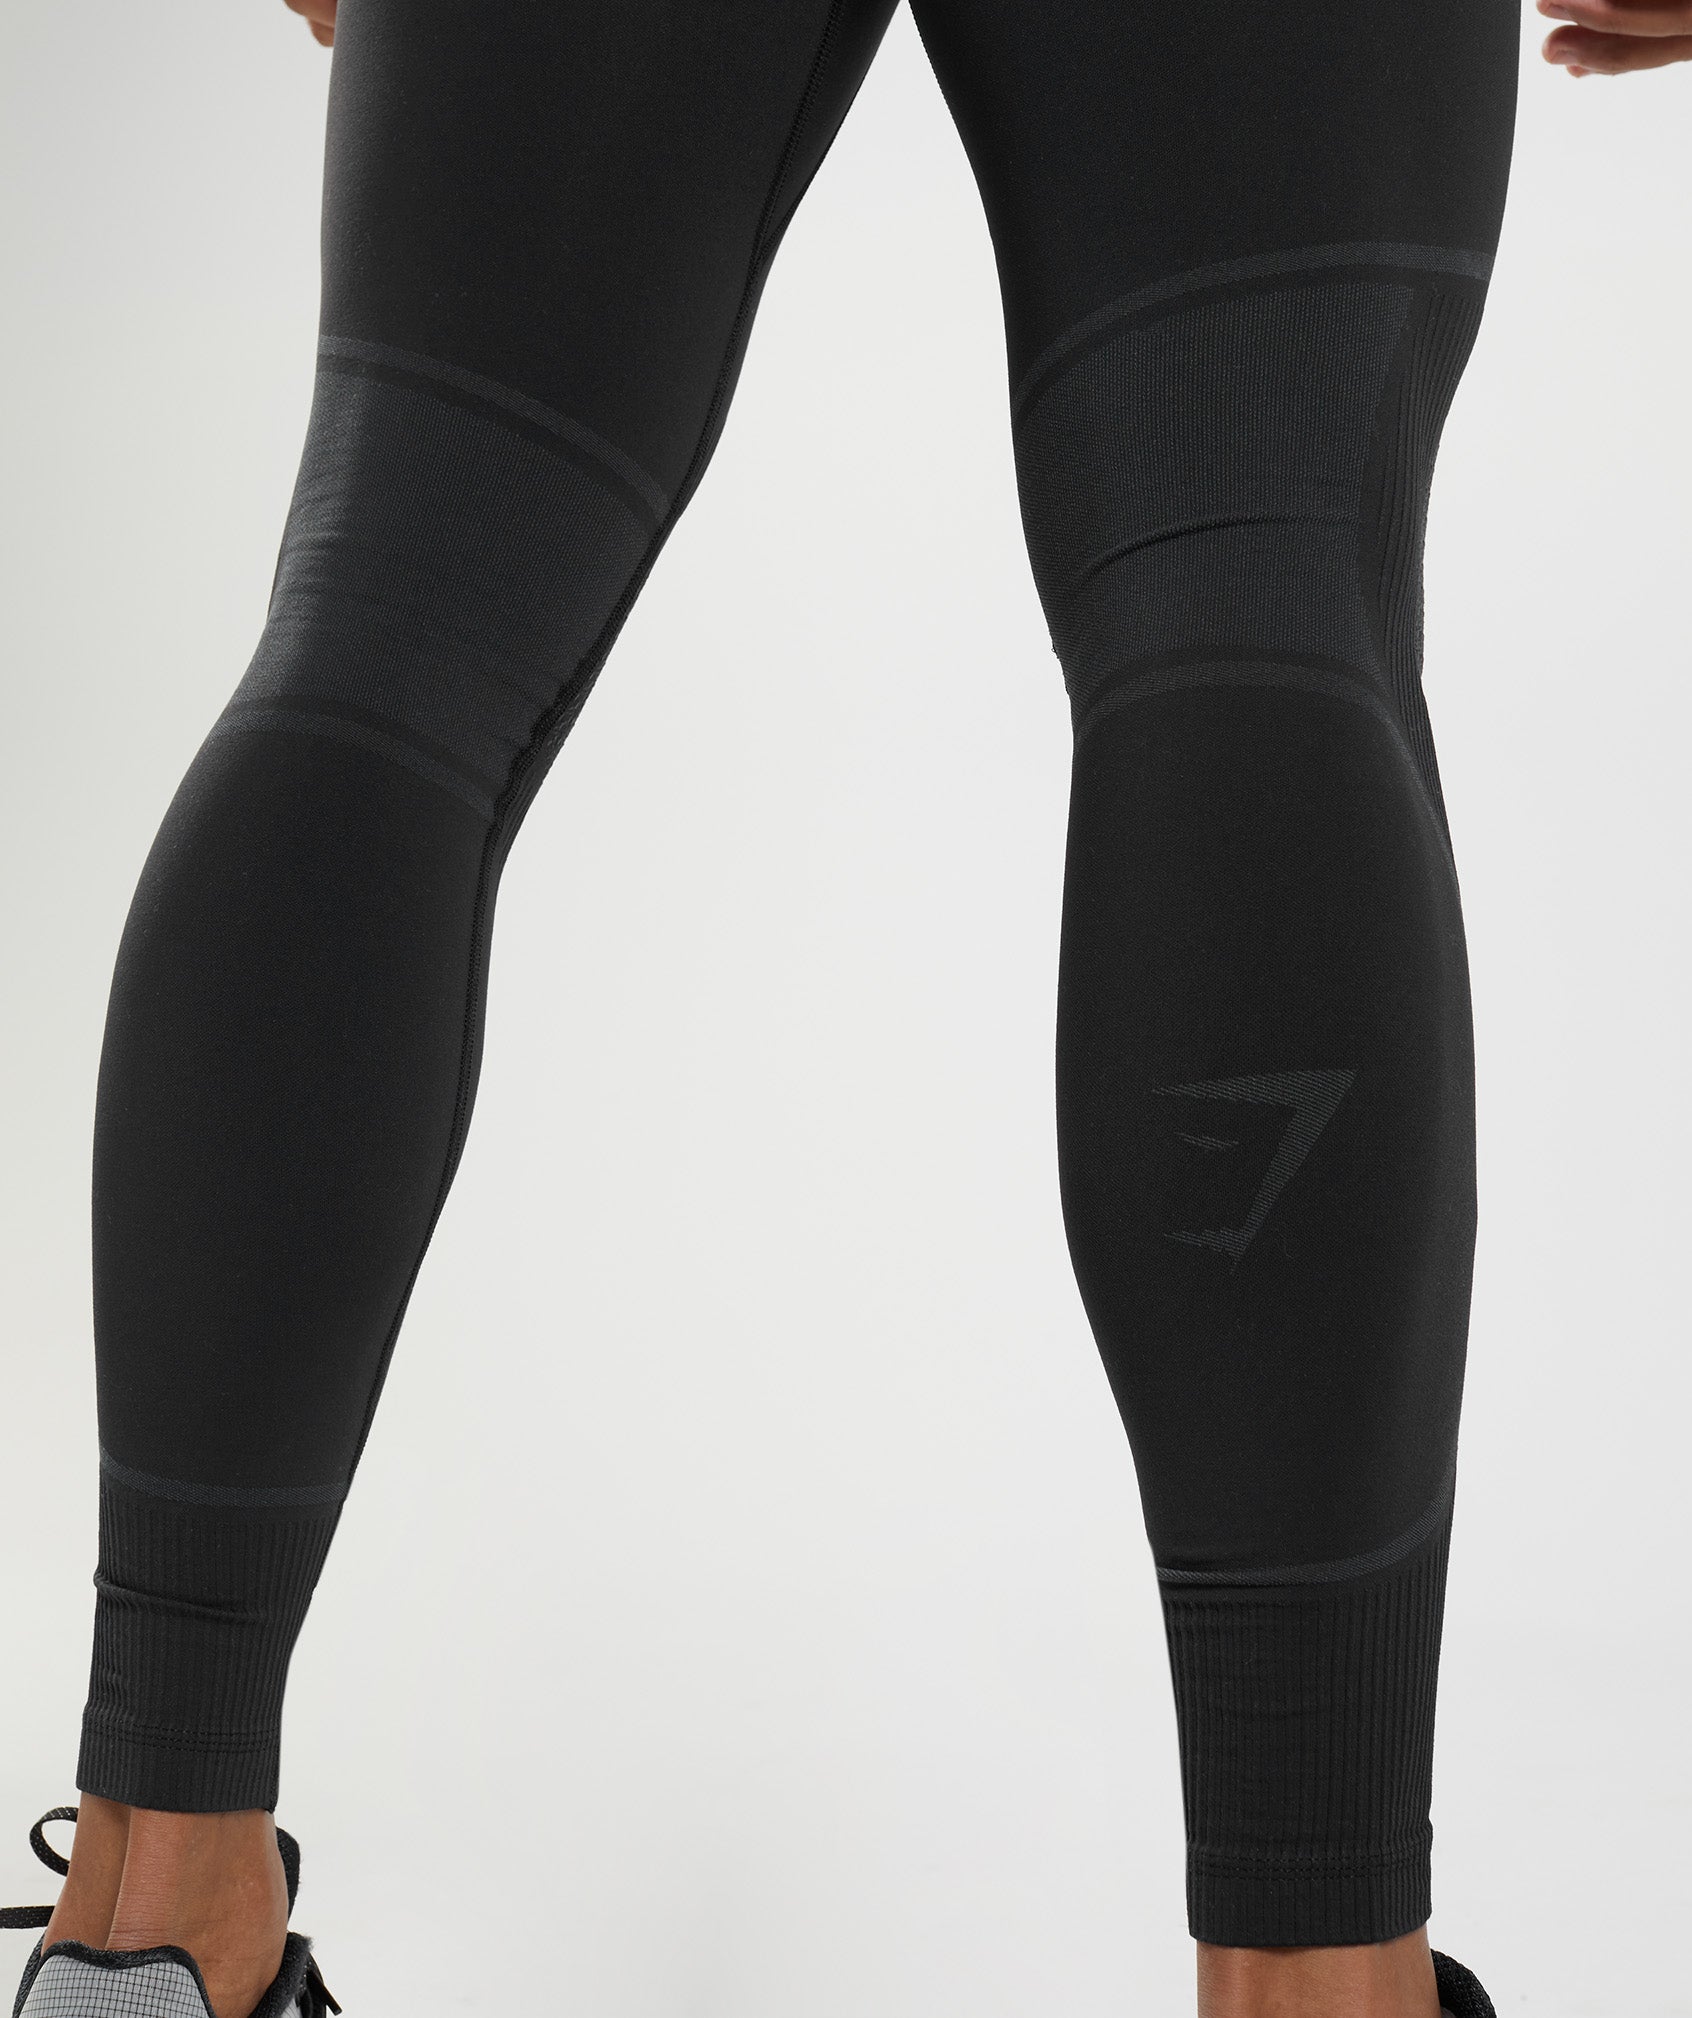 315 Seamless Tights in Black/Charcoal Grey - view 6